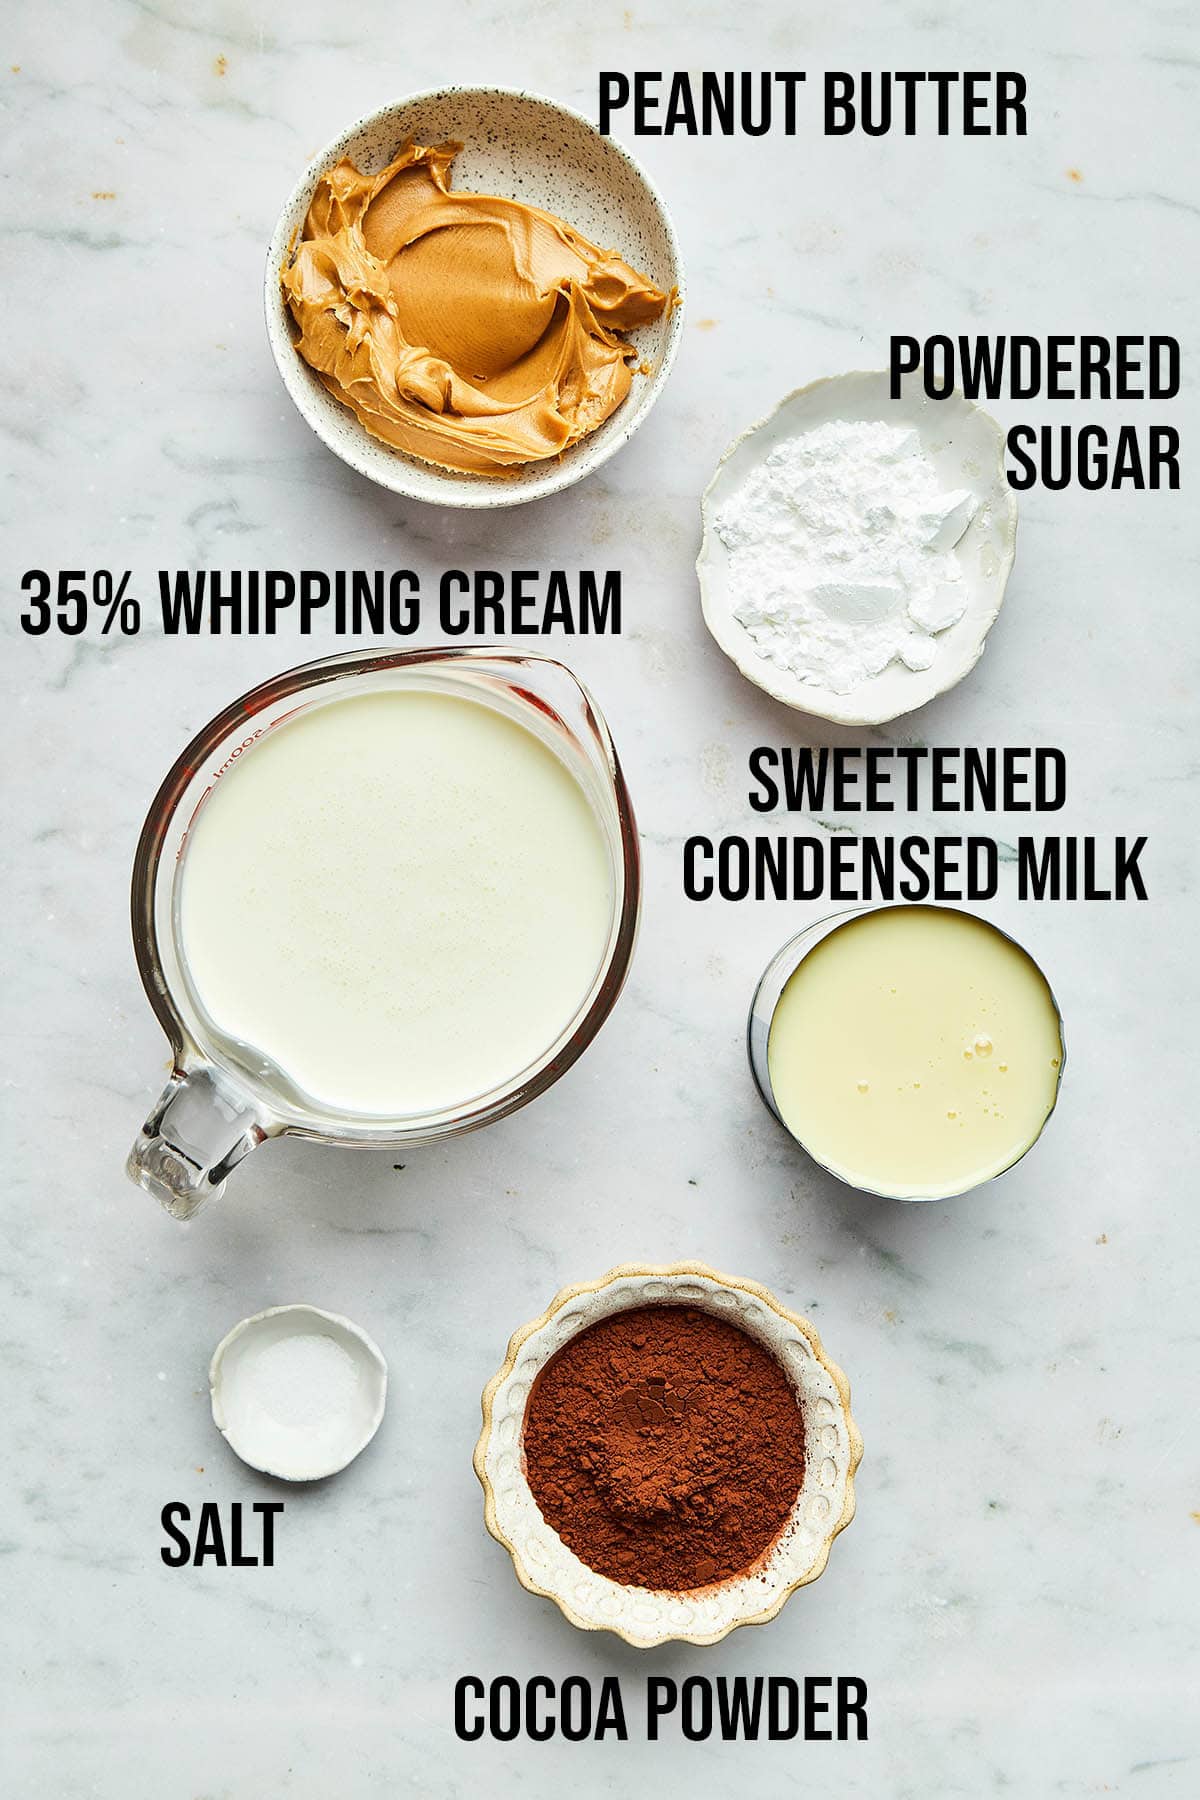 Ingredients to make chocolate peanut butter ice cream.